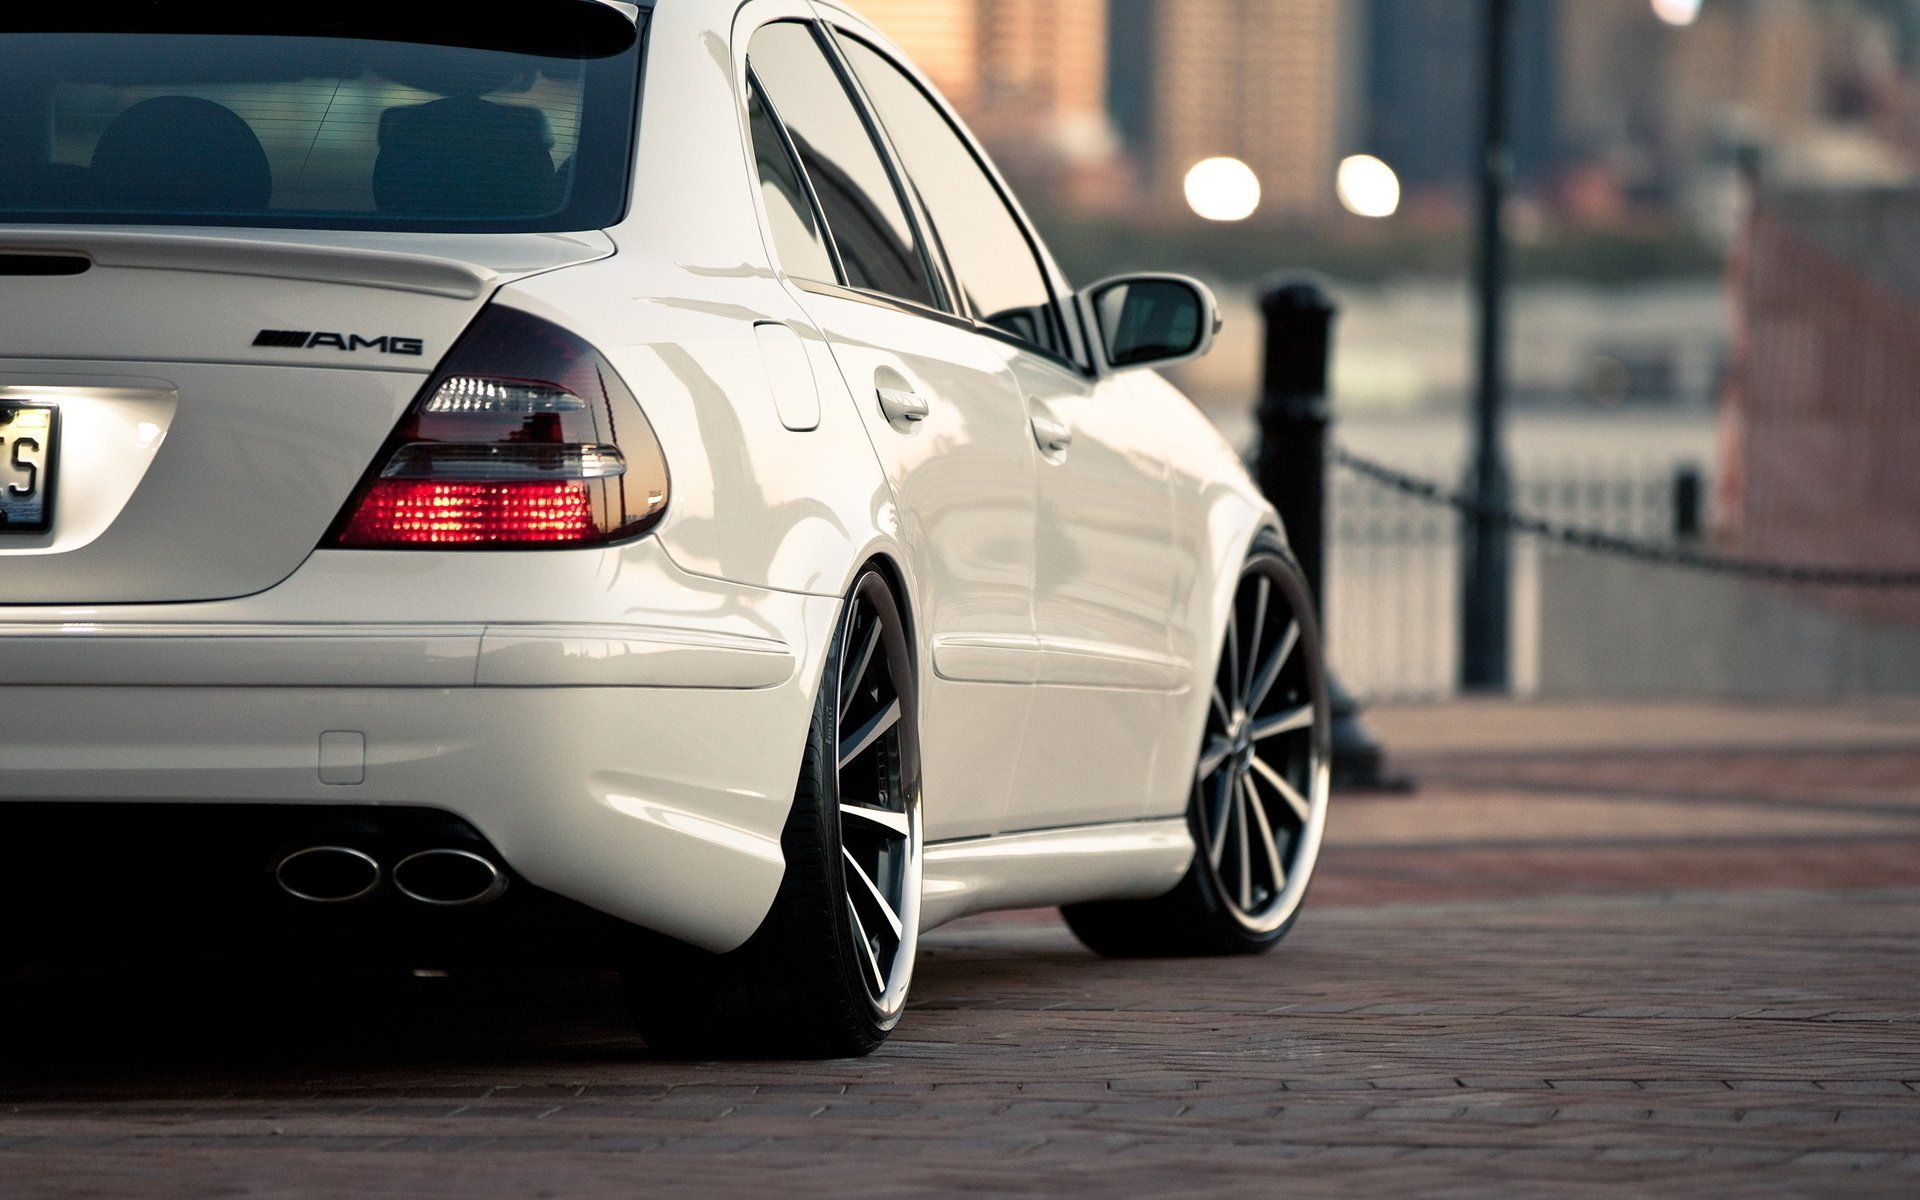 Mercedes Benz E Class HD Wallpaper And Background Image